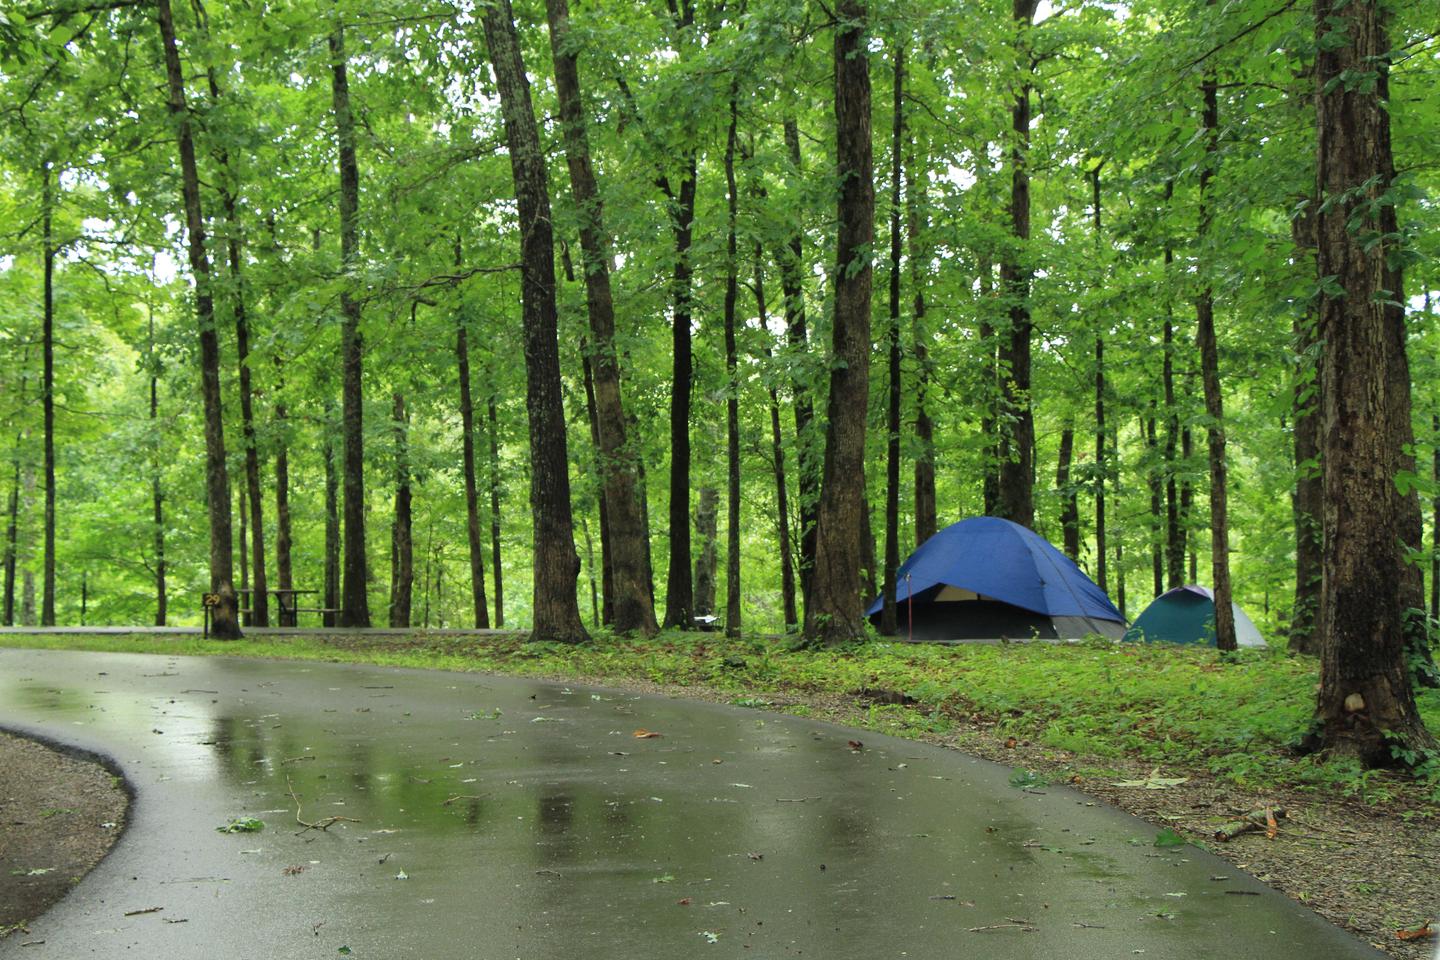 Tent camping at the Meriwether Lewis Death and Burial Site CampgroundThe campgroudn at the Meriwether Lewis site is a great basecamp for exploring the Natchez Trace Parkway in Tennessee